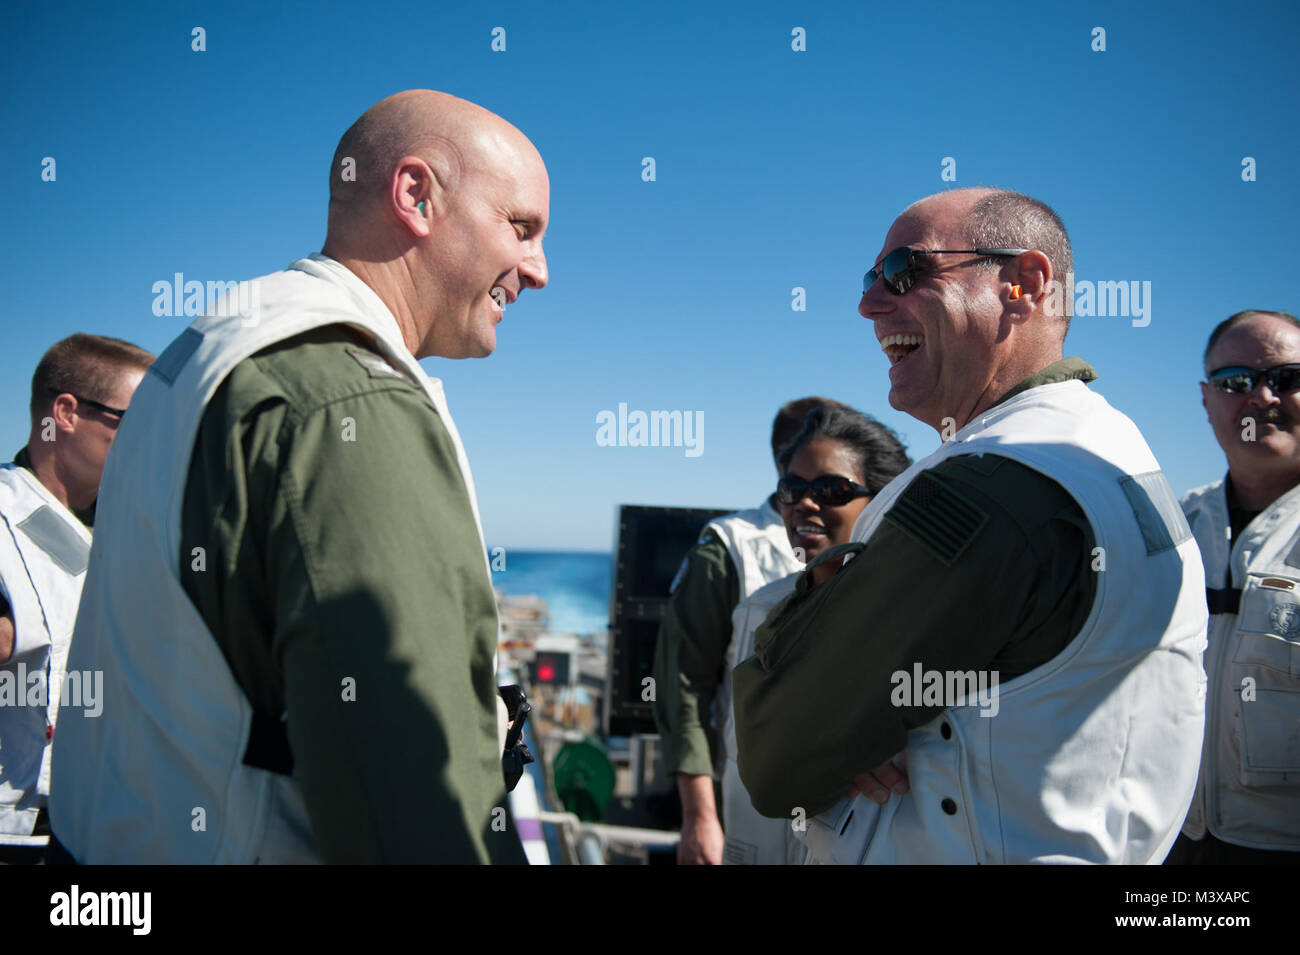 PACIFIC OCEAN (Nov. 3, 2014) Vice Adm. Dave Buss, Commander, Naval Air Forces, right, talks to Capt. J.J. Cummings, executive officer of the aircraft carrier USS Nimitz (CVN 68), after observing an F-35C Lightening II carrier variant Joint Strike Fighter conduct its first arrested landing aboard Nimitz. Nimitz is currently underway conducting routine training exercises. (U.S. Navy photo by Mass Communication Specialist 3rd Class Kelly M. Agee/Released) 141103-N-MX772-245.jpg by USS NIMITZ (CVN 68) Stock Photo